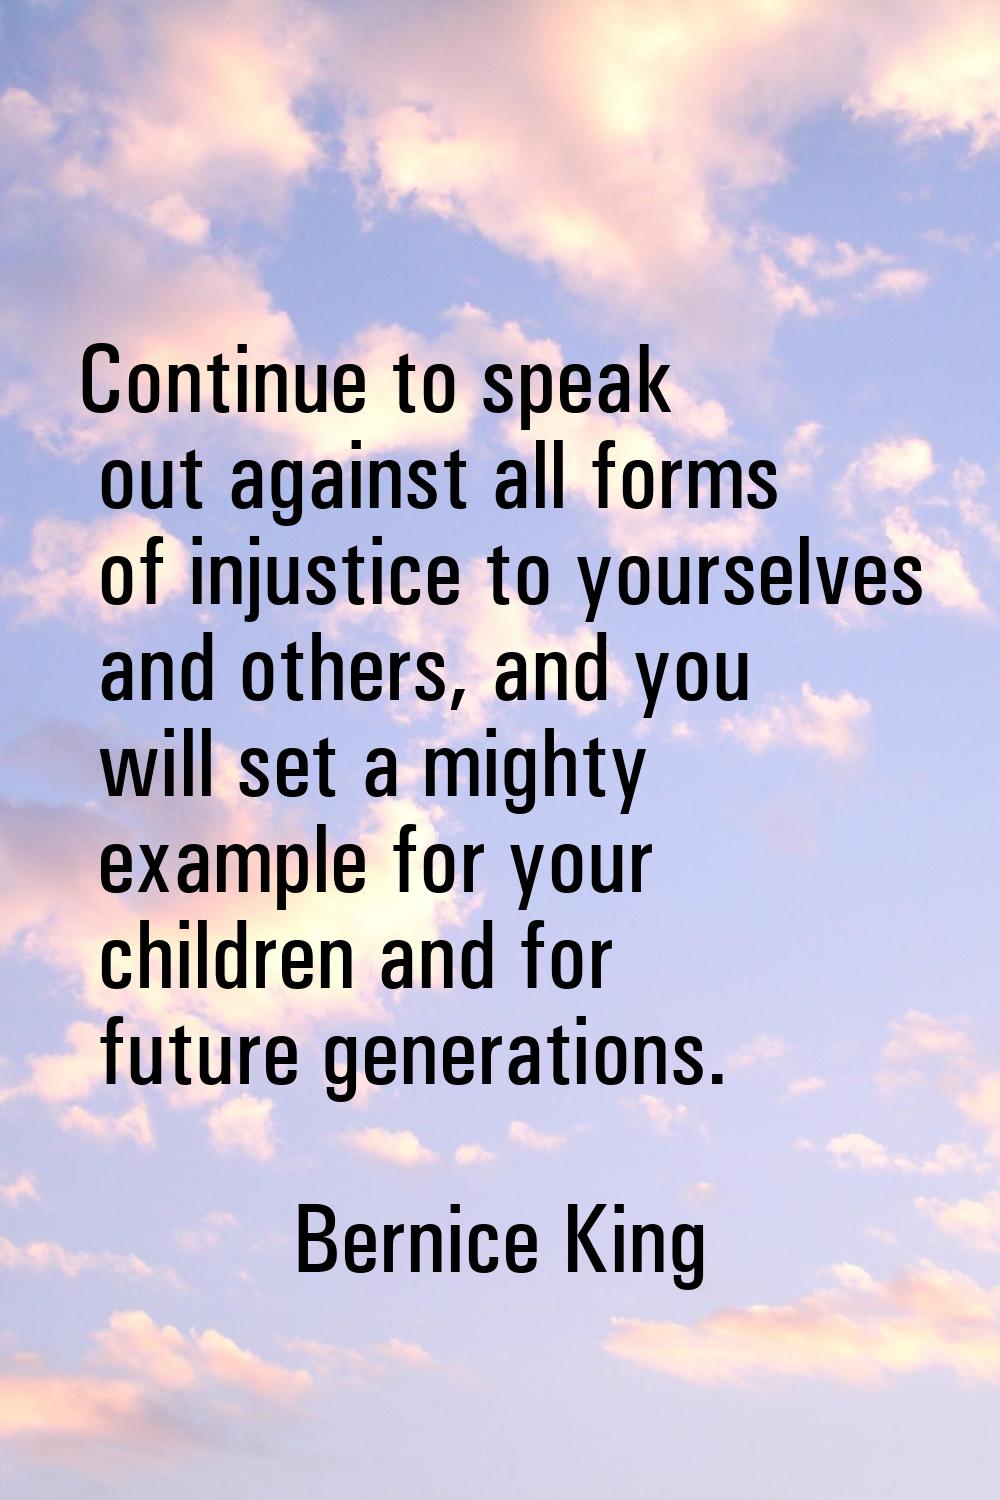 Continue to speak out against all forms of injustice to yourselves and others, and you will set a m